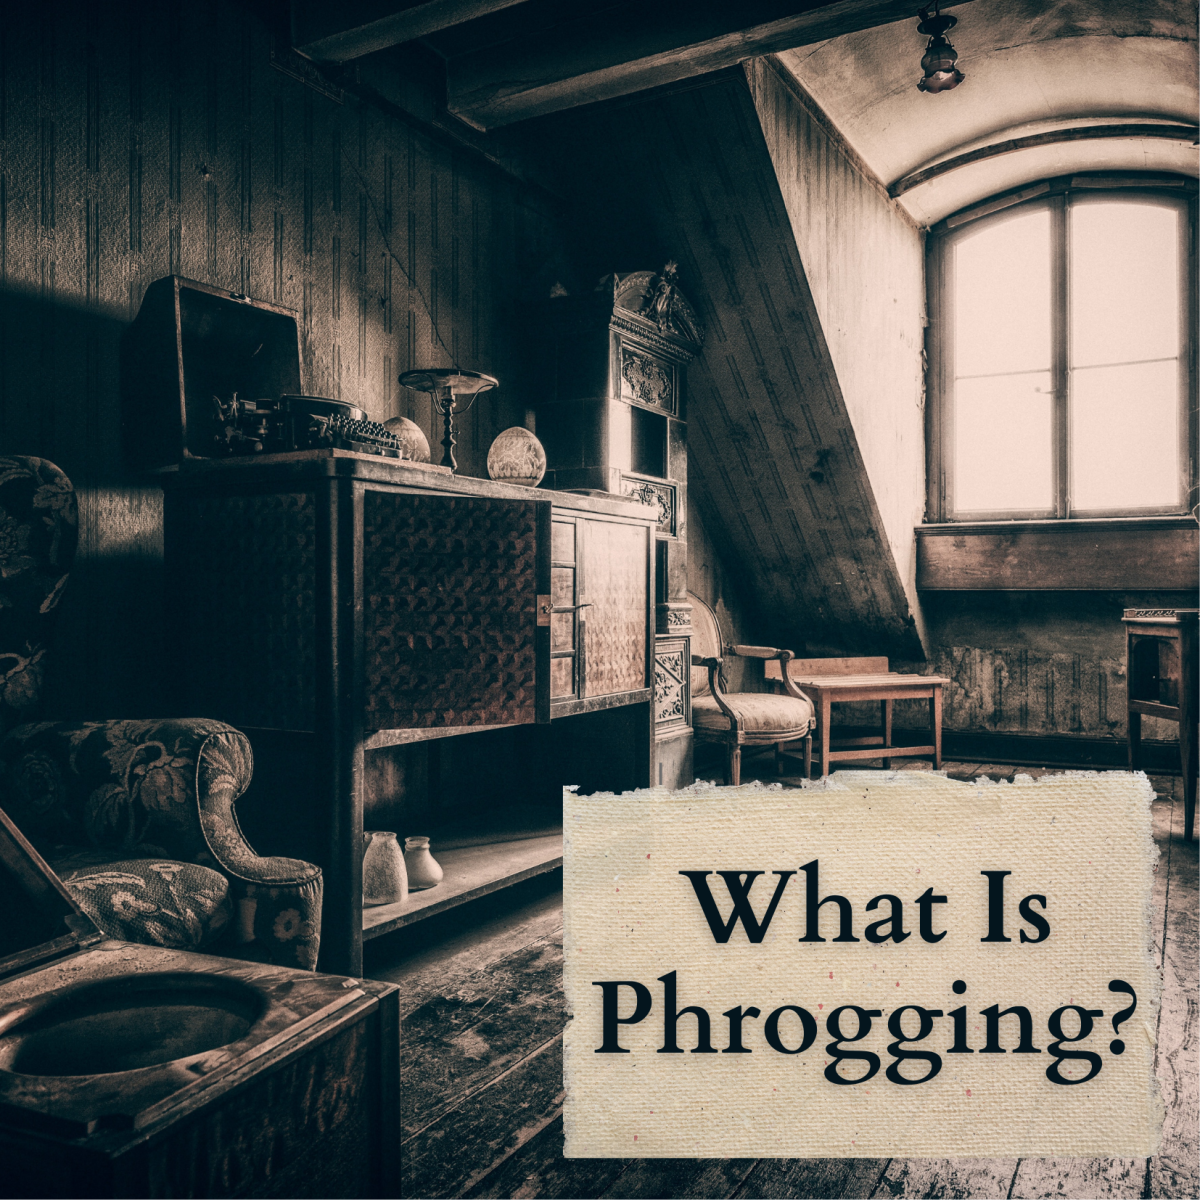 Is phrogging real? Read on for the phrogging definition, a breakdown of phrogging vs. squatting, and more.